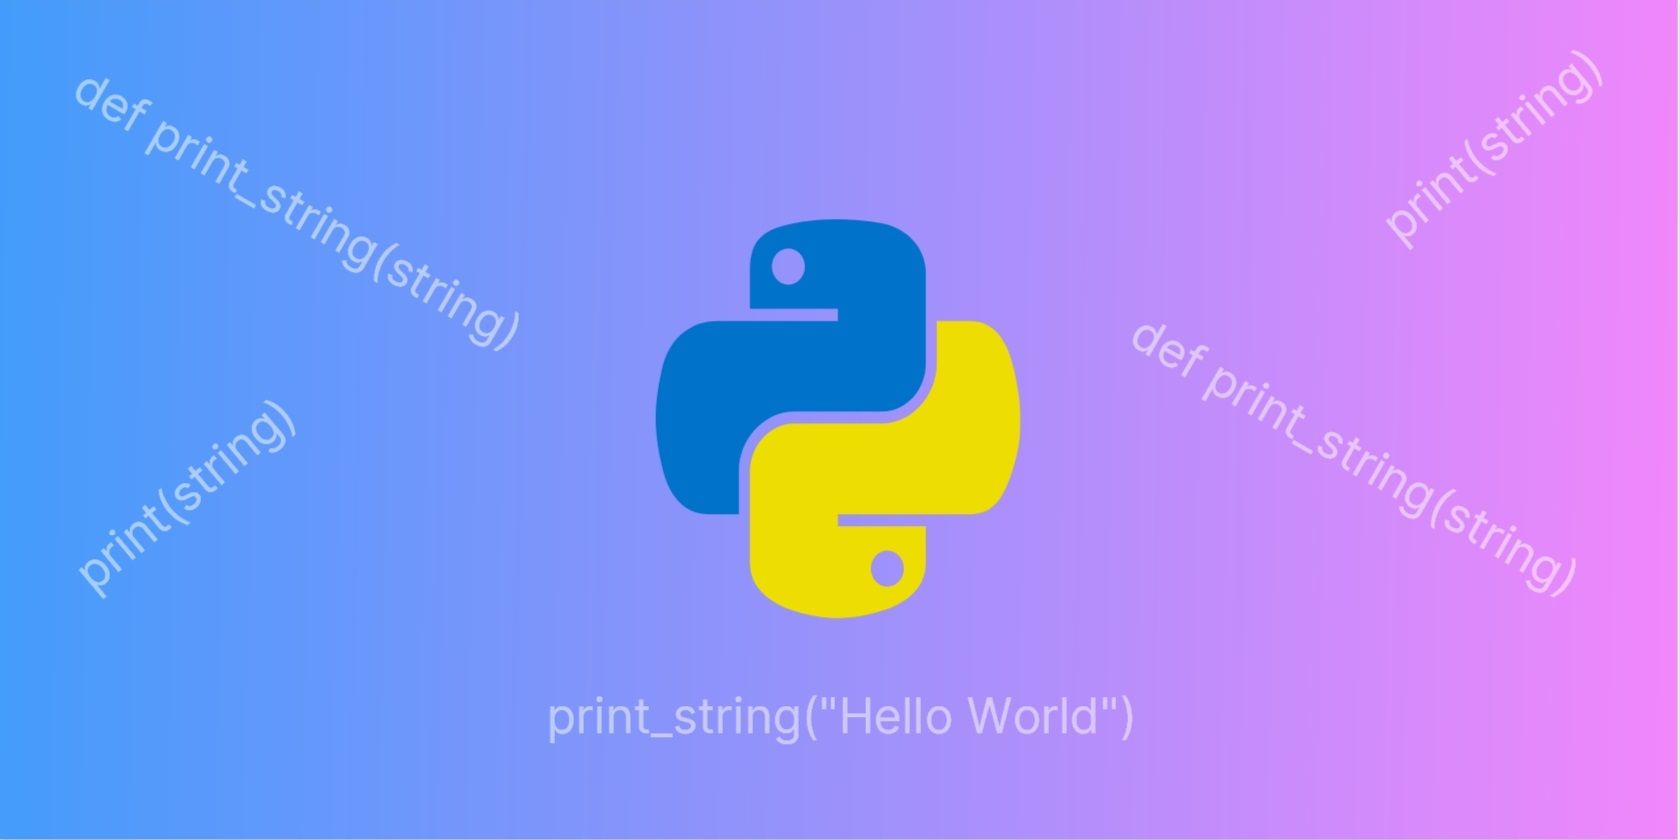 python logo with python functions scribbled around it